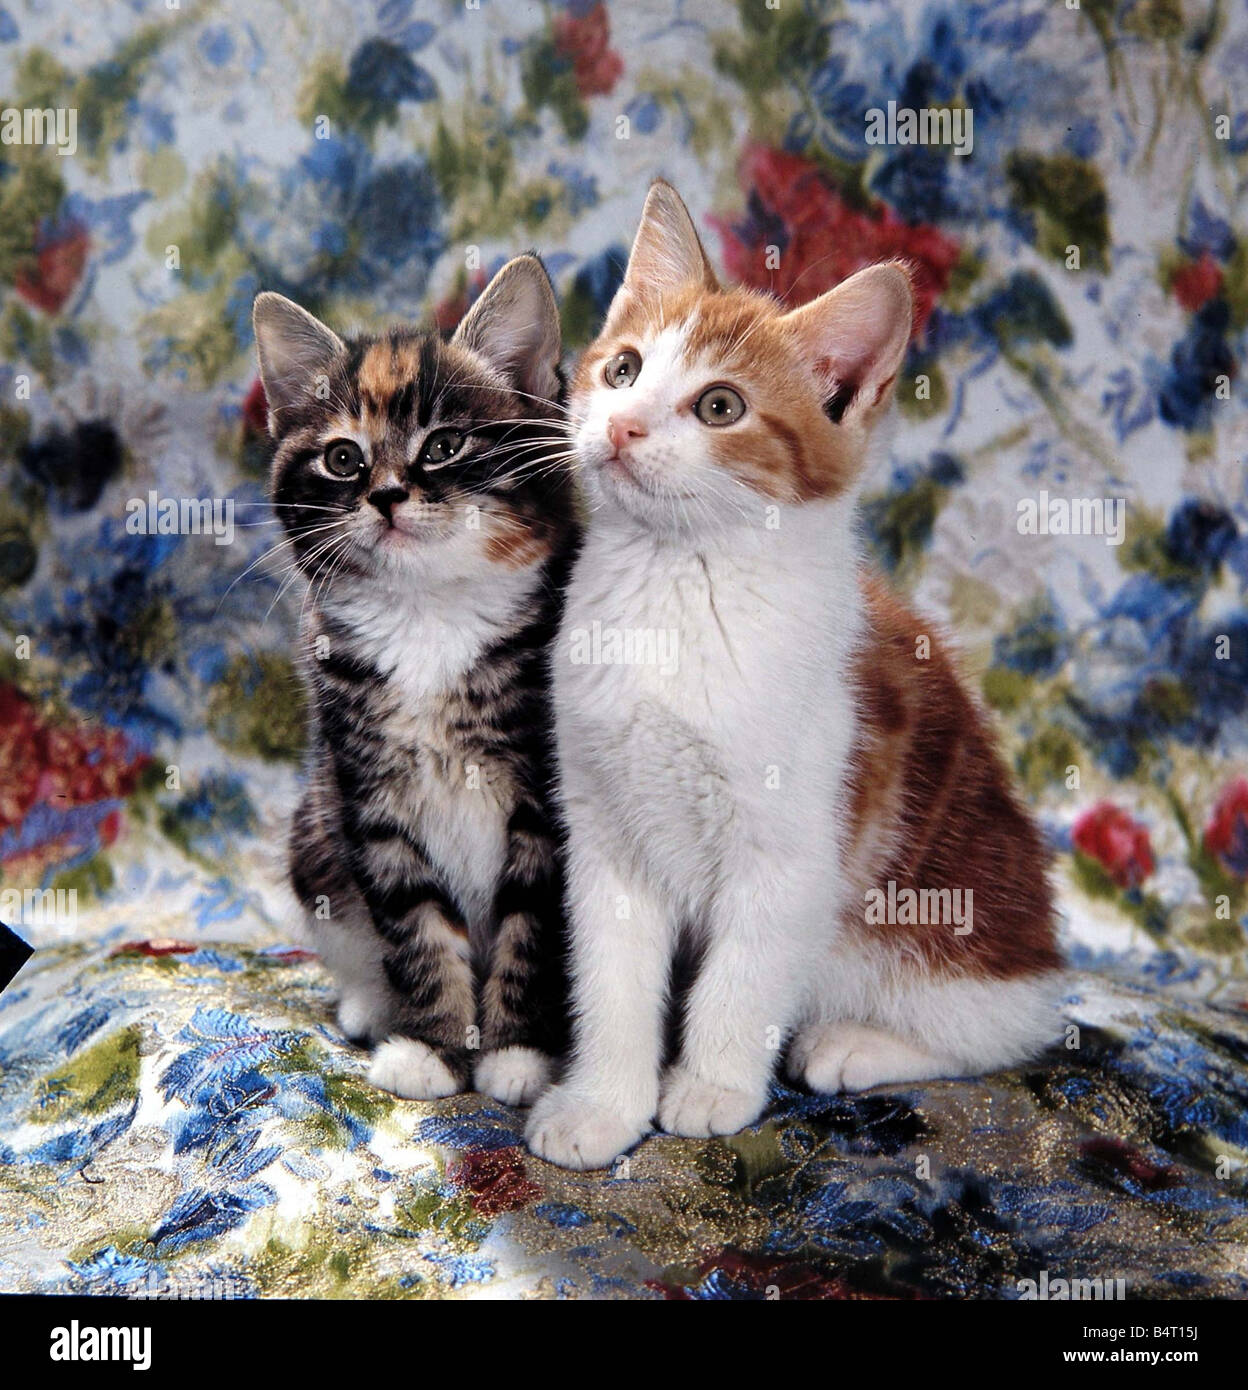 Two cats sat on a floral pattern circa 1960 Stock Photo